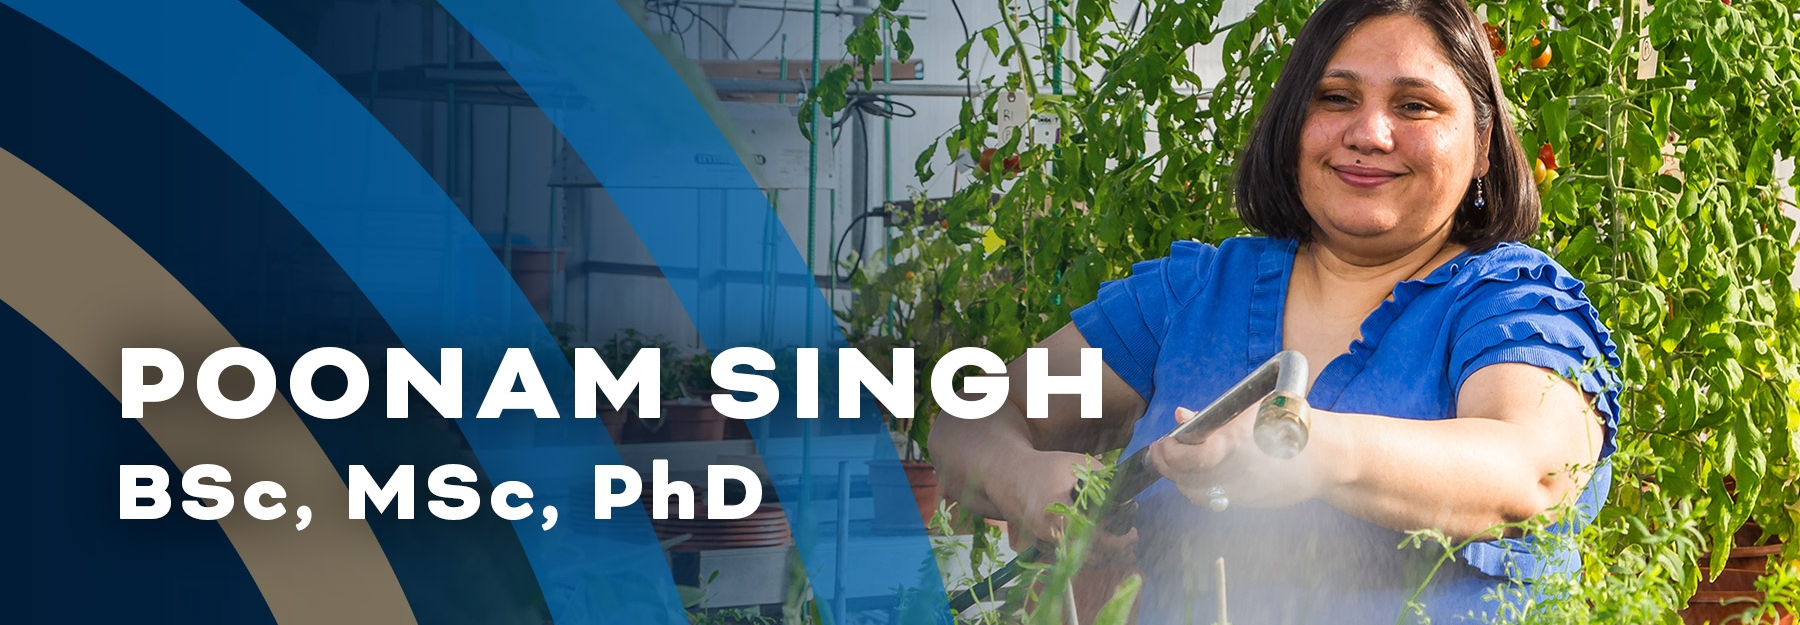 Dr. Poonam Singh stands just to the right of the centre of the photo with green plants in the background and foreground. She is wearing a blue t-shirt and holds a hose that is watering the plants in front of her.